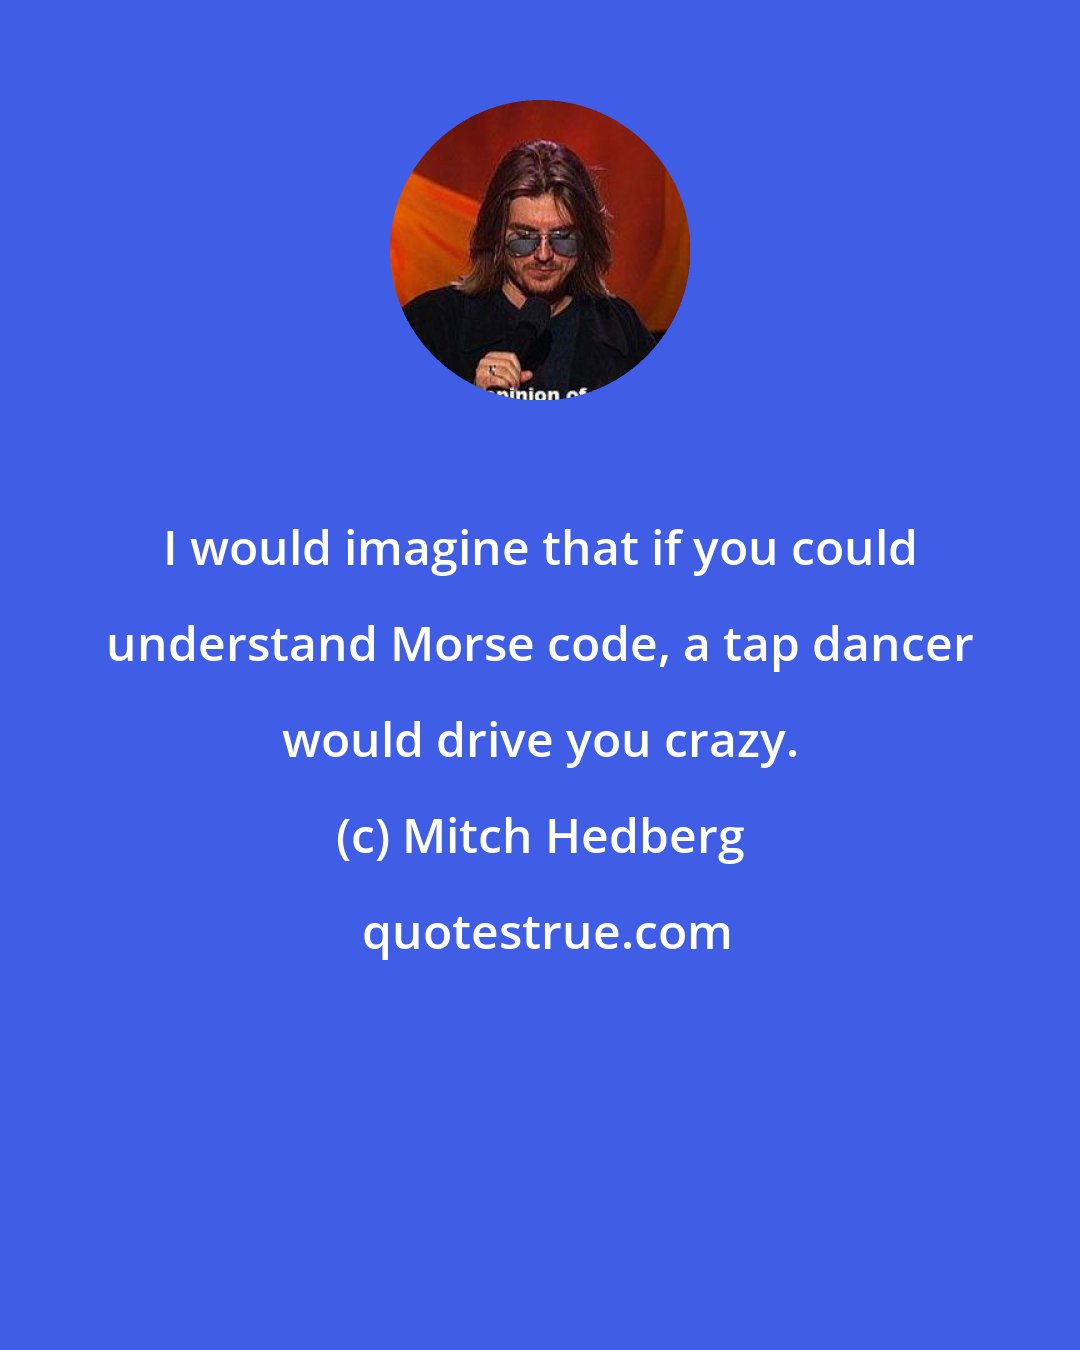 Mitch Hedberg: I would imagine that if you could understand Morse code, a tap dancer would drive you crazy.